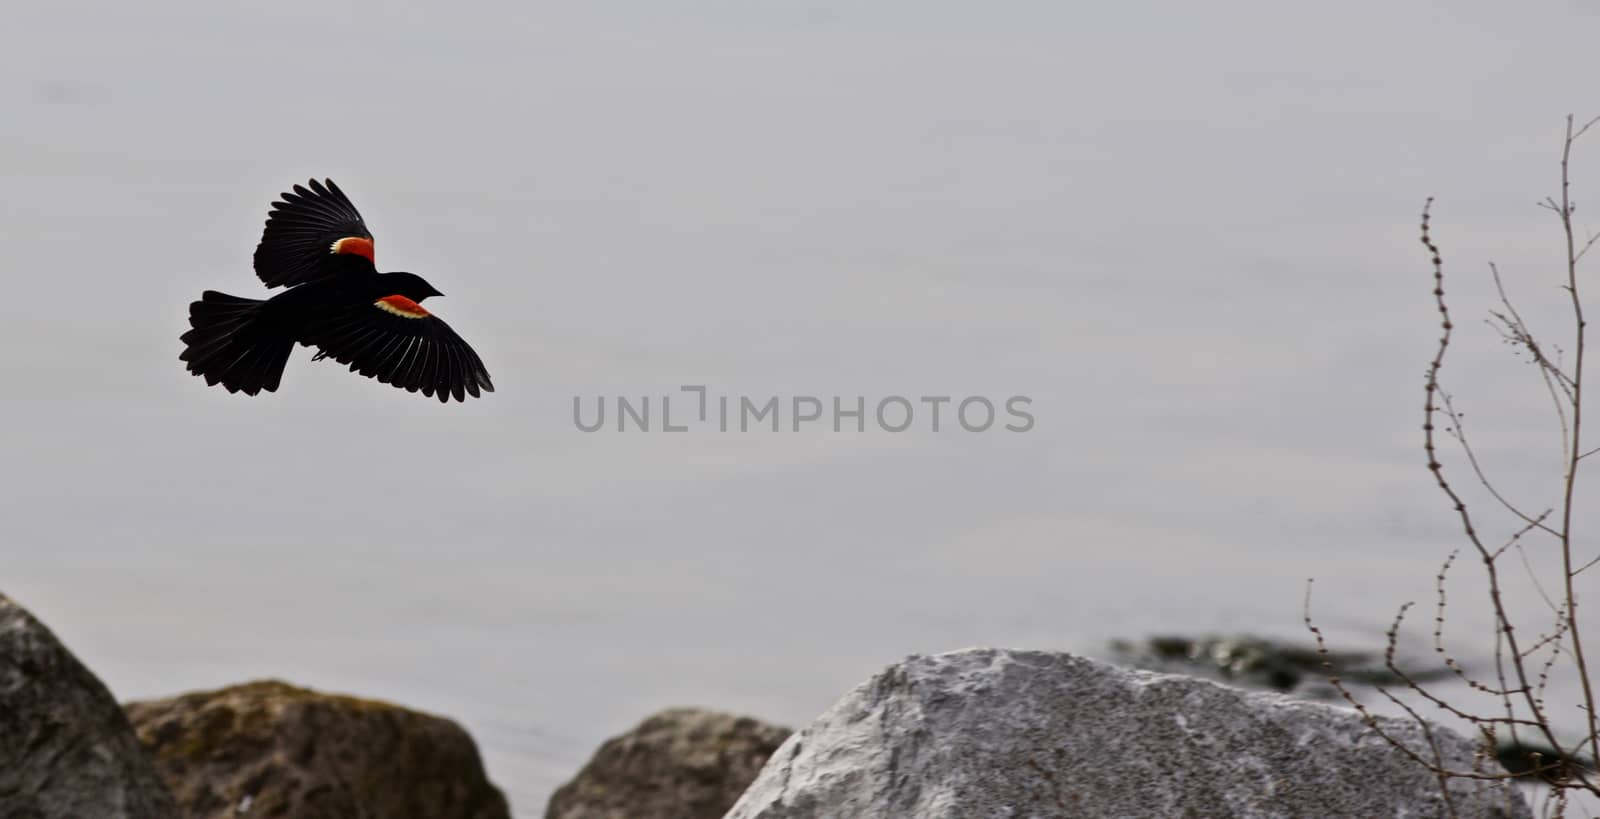 Beautiful background with the flying blackbird and the rocks and water